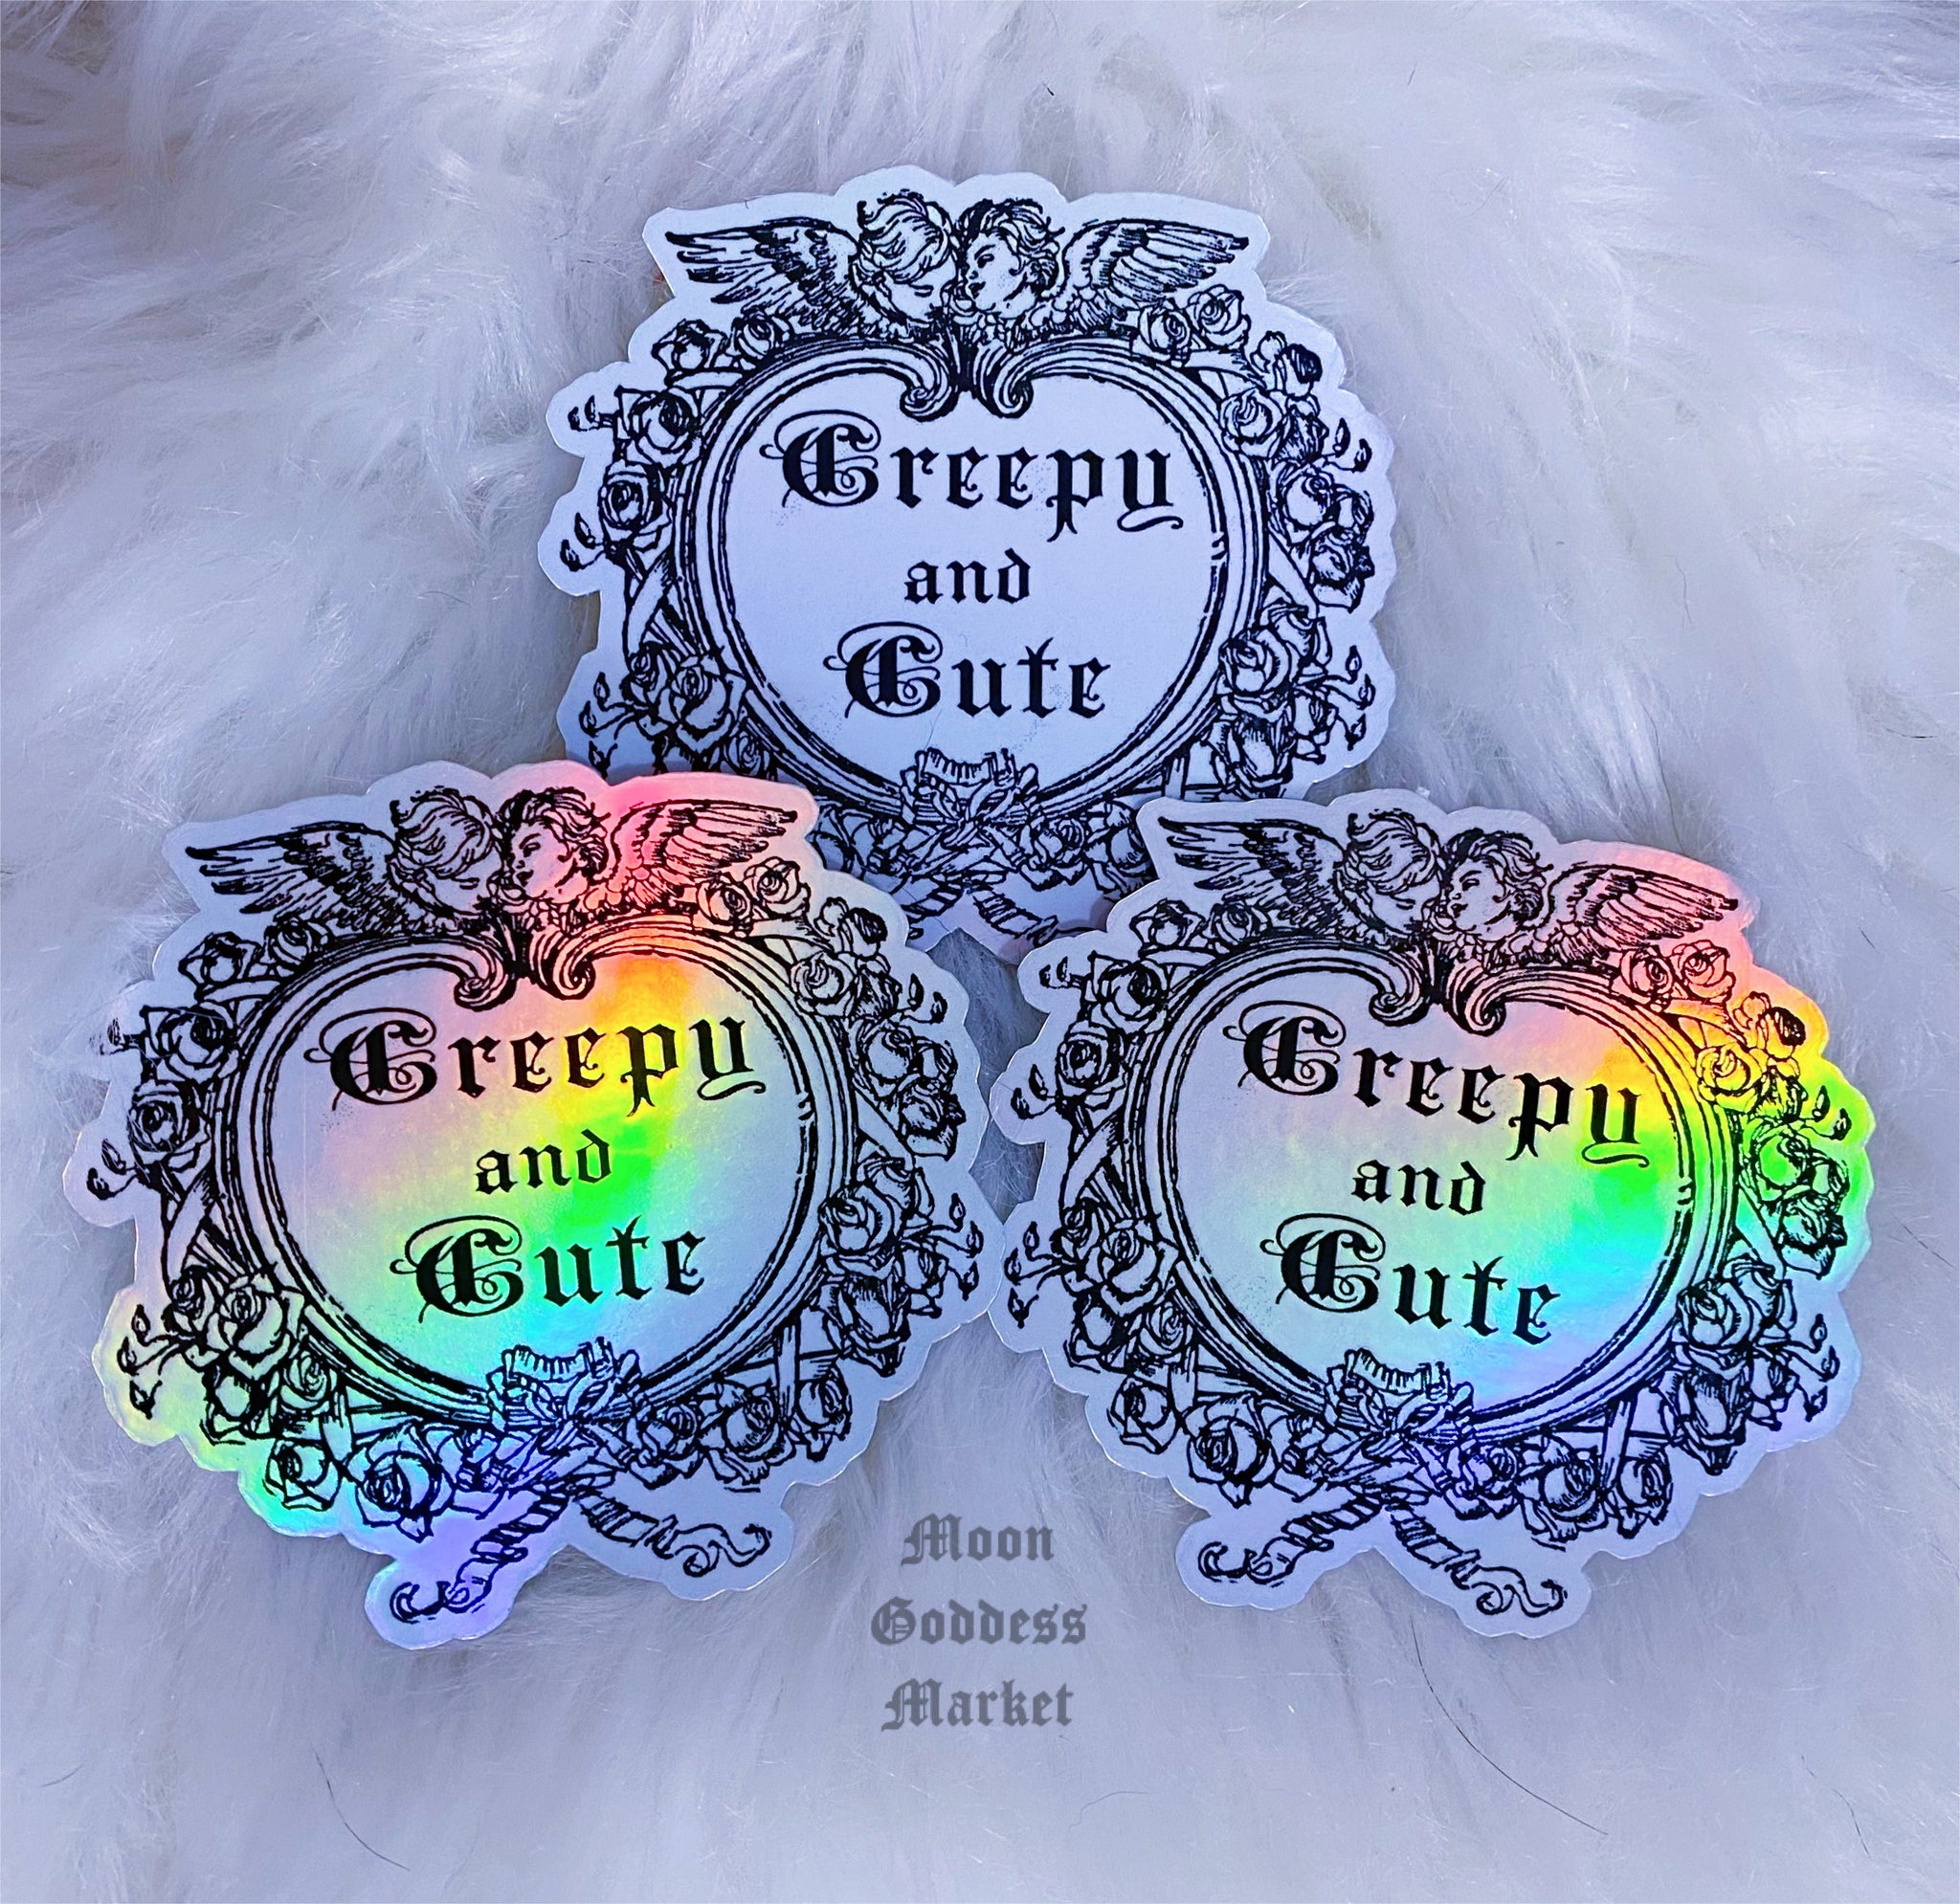 Creepy But Cute Holographic stickers - Moon Goddess Market